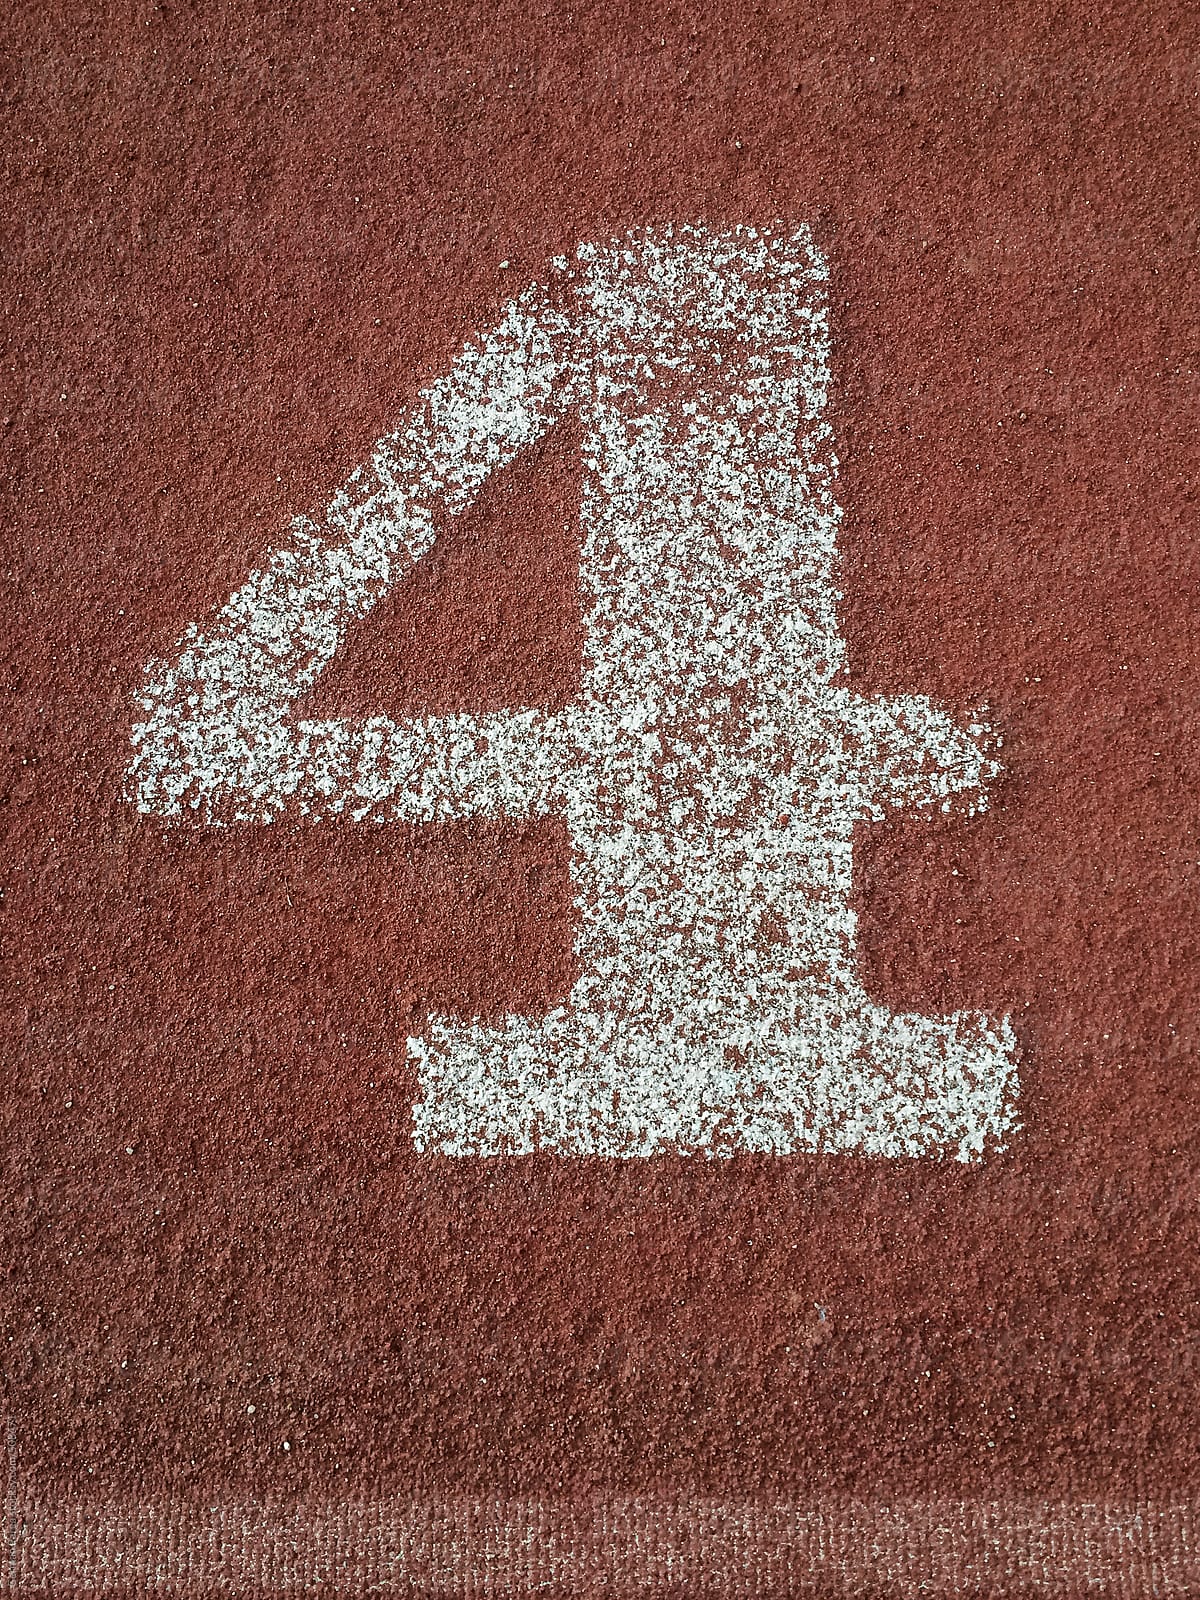 white number four painted on an running track